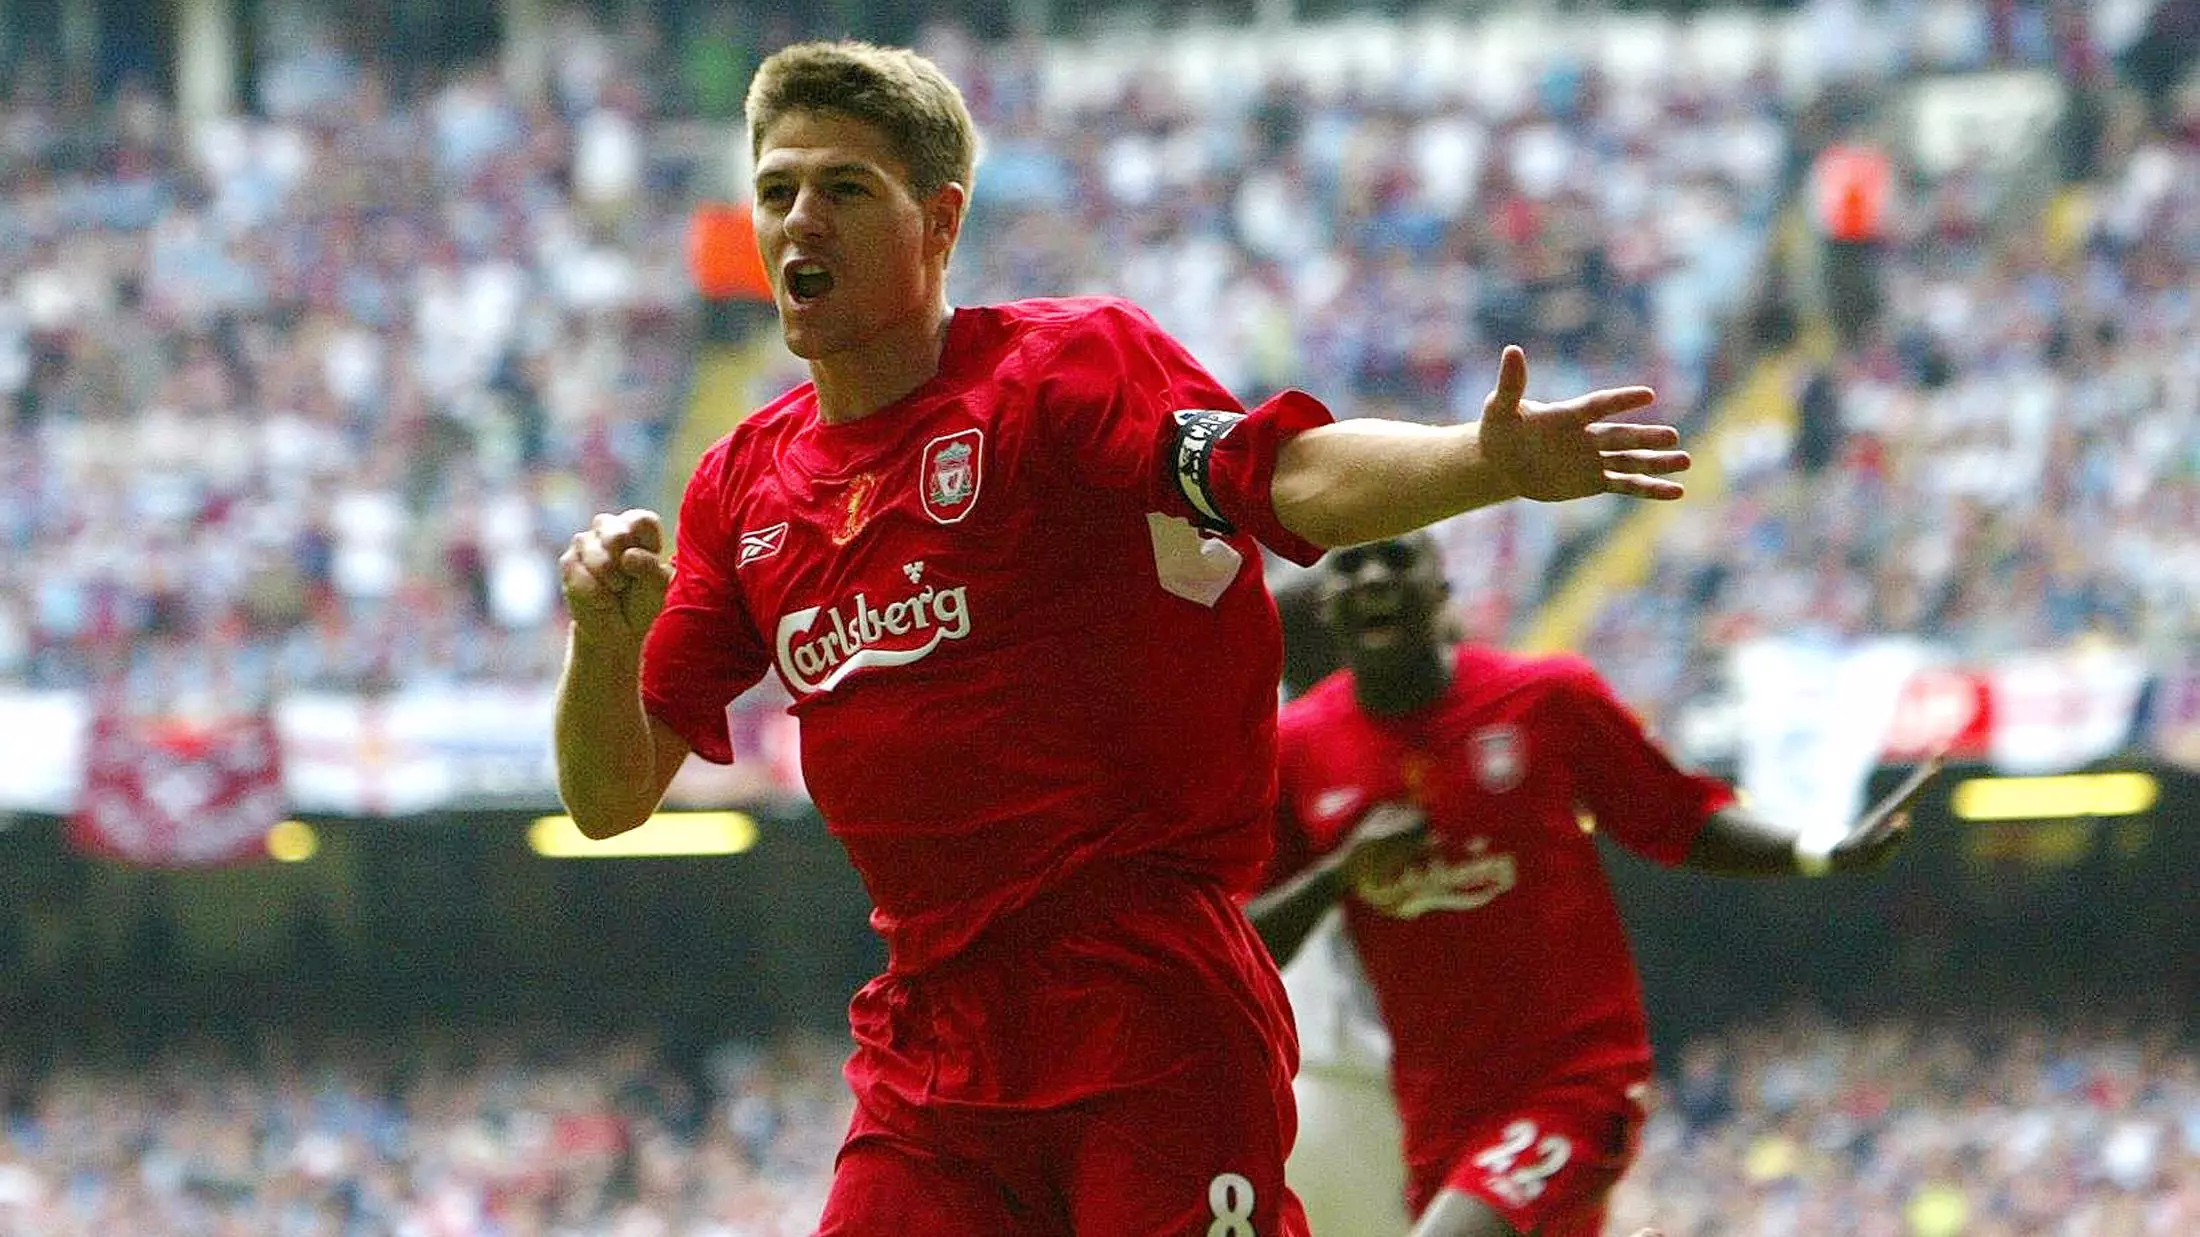 Steven Gerrard To Pull On The Red Shirt Again